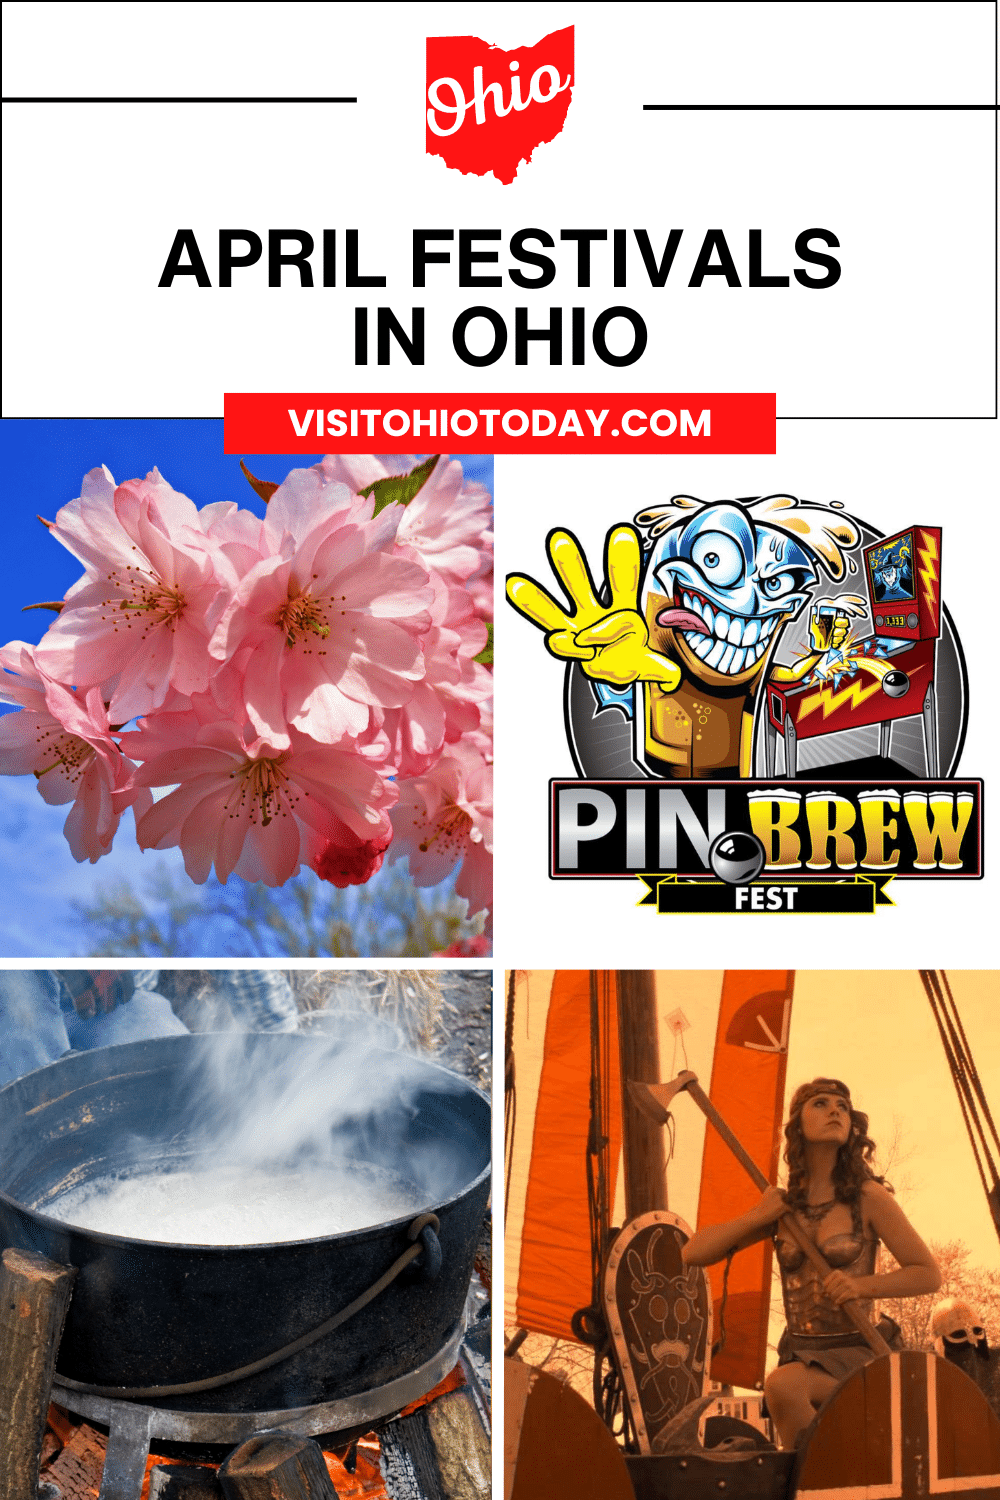 April is the month to celebrate spring and enjoy the warmer weather. This list of April Festivals in Ohio can help you find ways to spend your time joyfully!